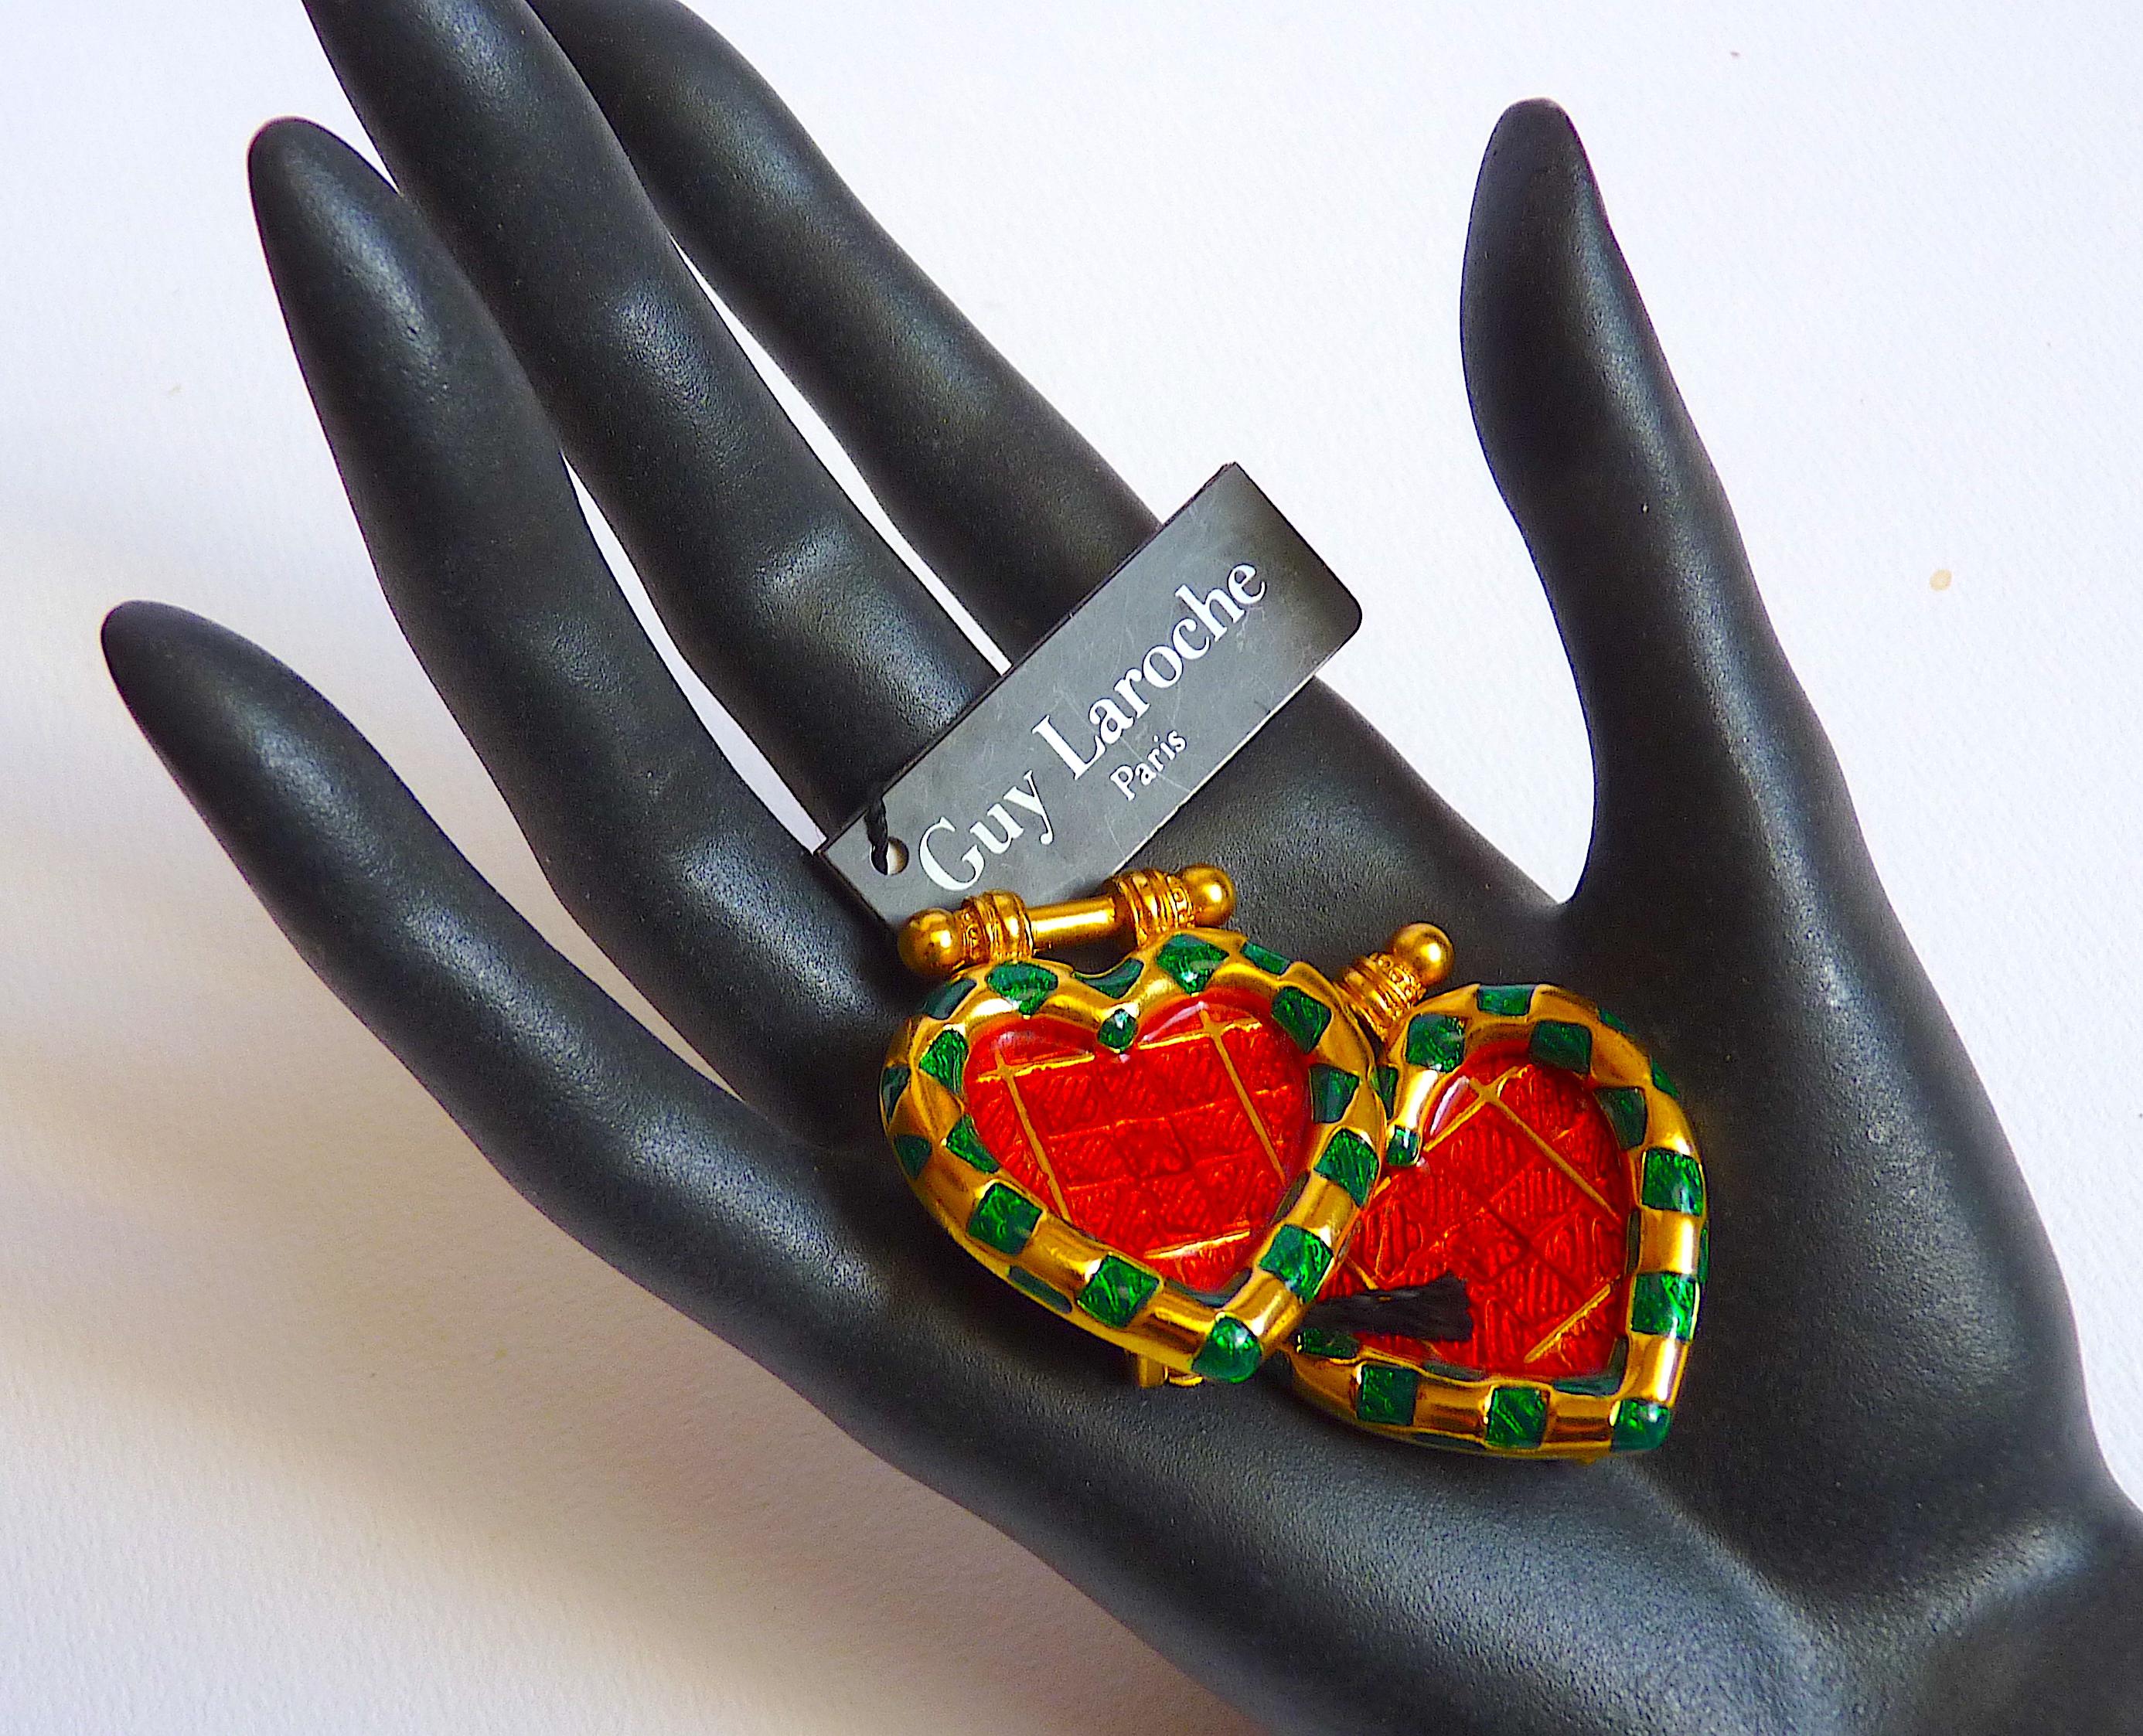 Exquisite GUY LAROCHE PARIS Clip On Earrings, Enameled Metal Heart and Gold Tone Metal, Vintage from the 1980's
Signed GUY LAROCHE PARIS at back

CONDITION : NEW WITH TAG, NEVER WORN, MINT CONDITION

Measurement : around 4 X 3 cm

You will find on